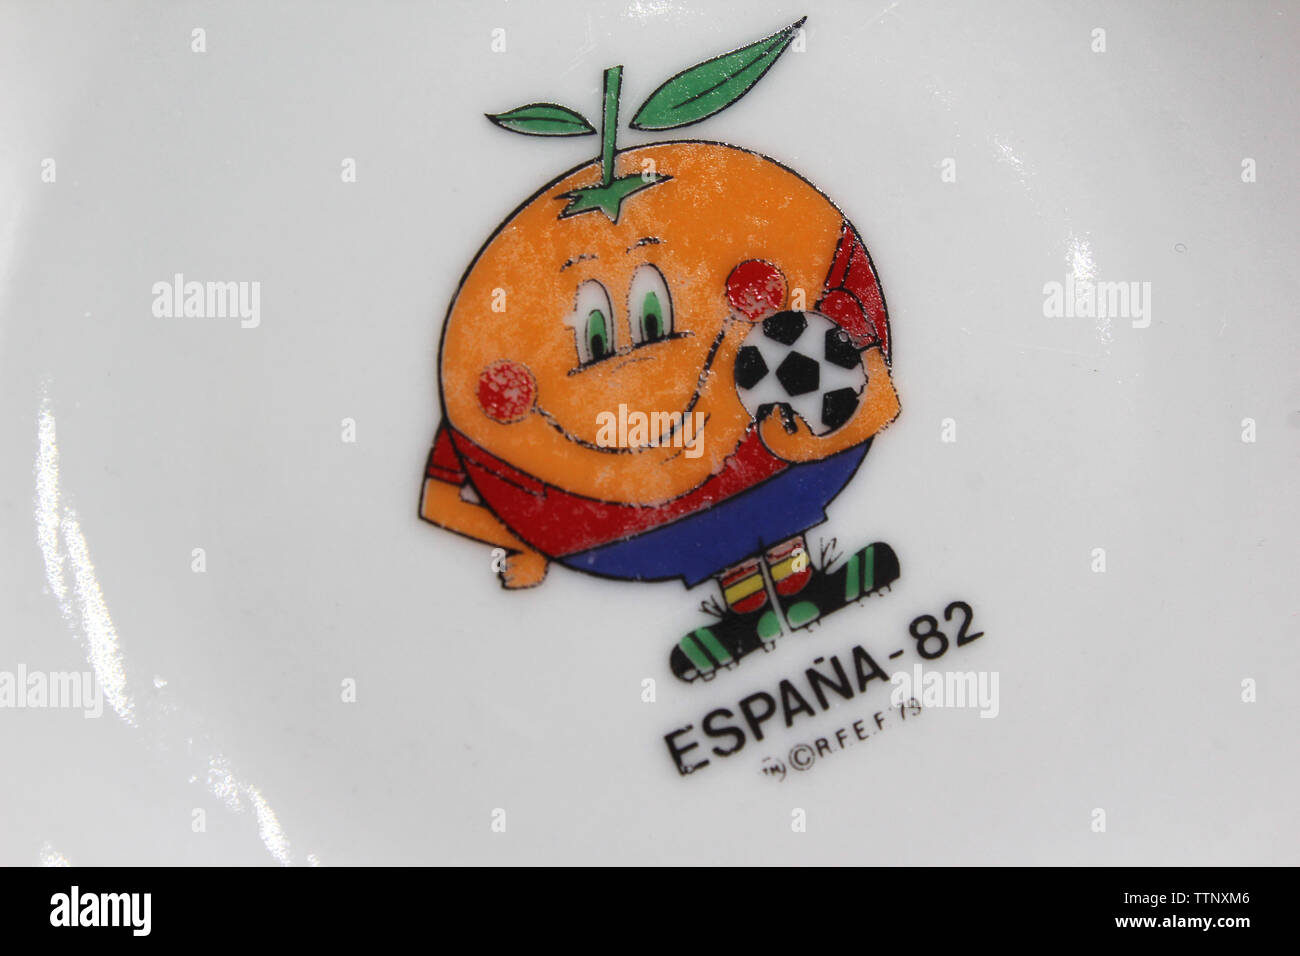 Vintage porcelain plate with logo Naranjito mascot of Soccer-football - World Cup Spain 1982, isolated on white background, close-up Stock Photo